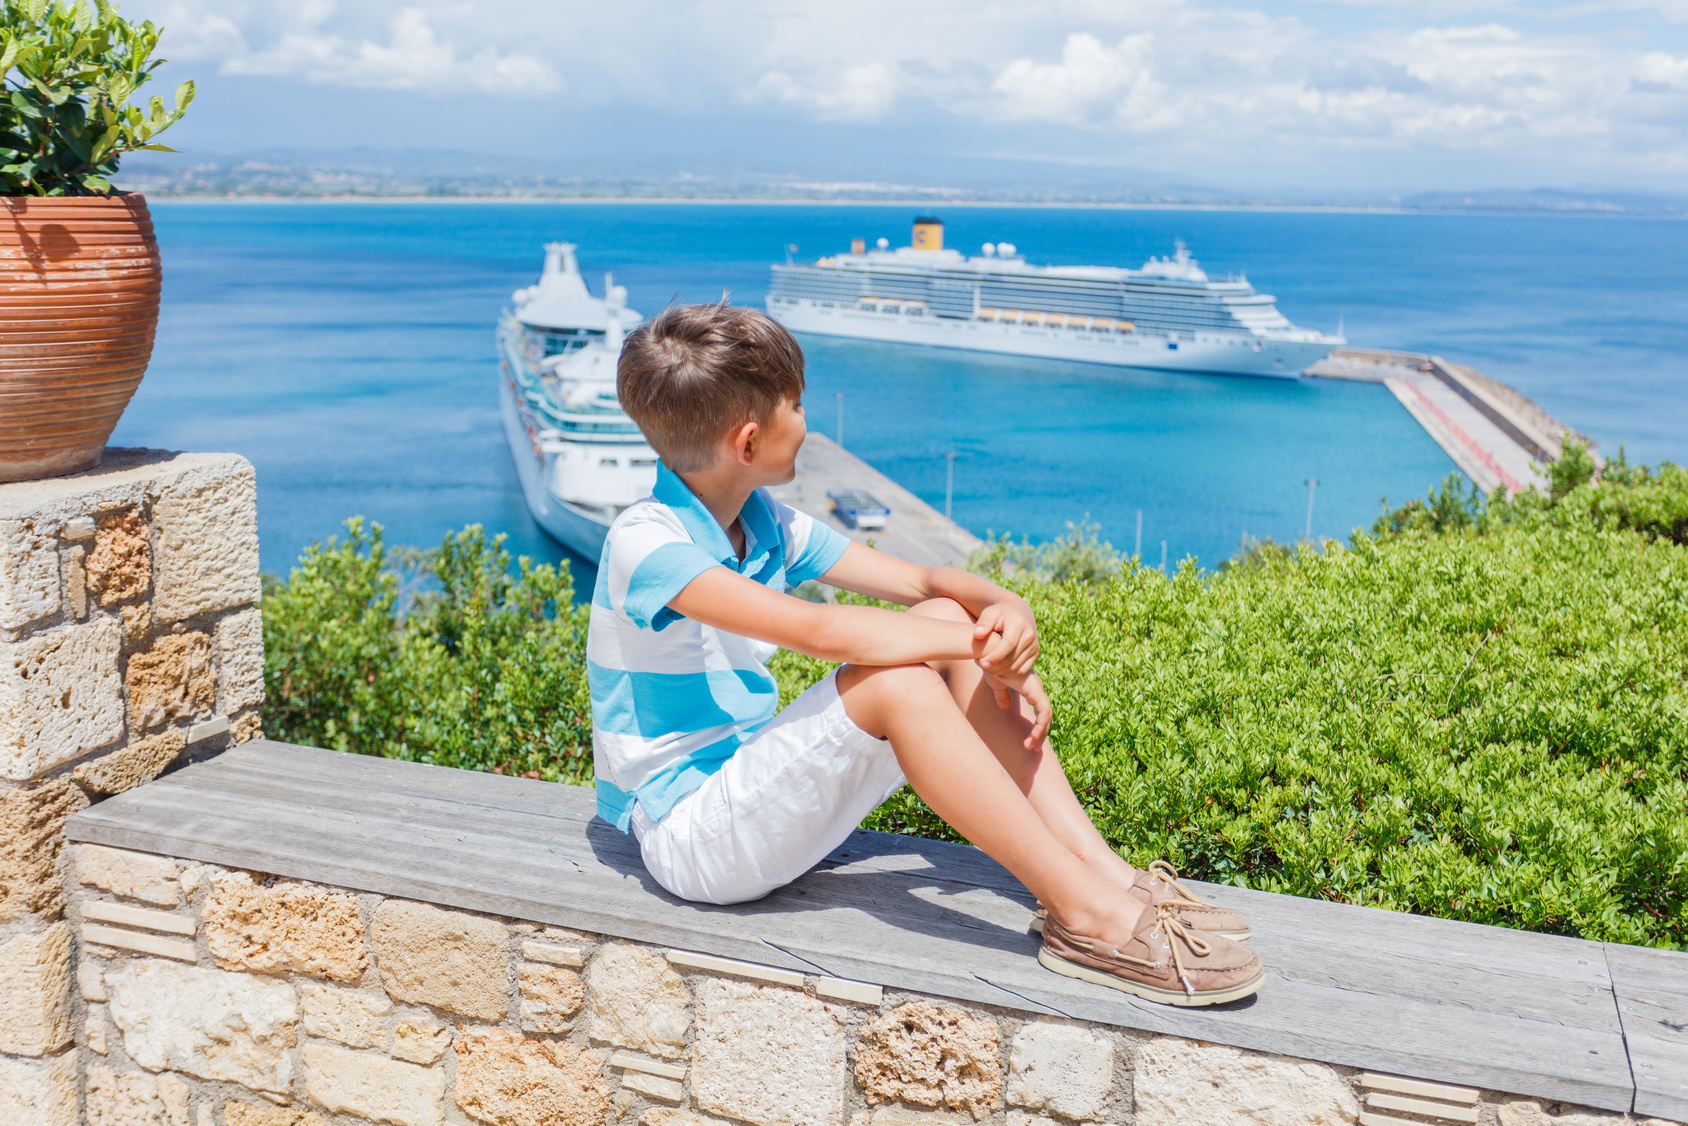 Cruises for families are a great holiday idea